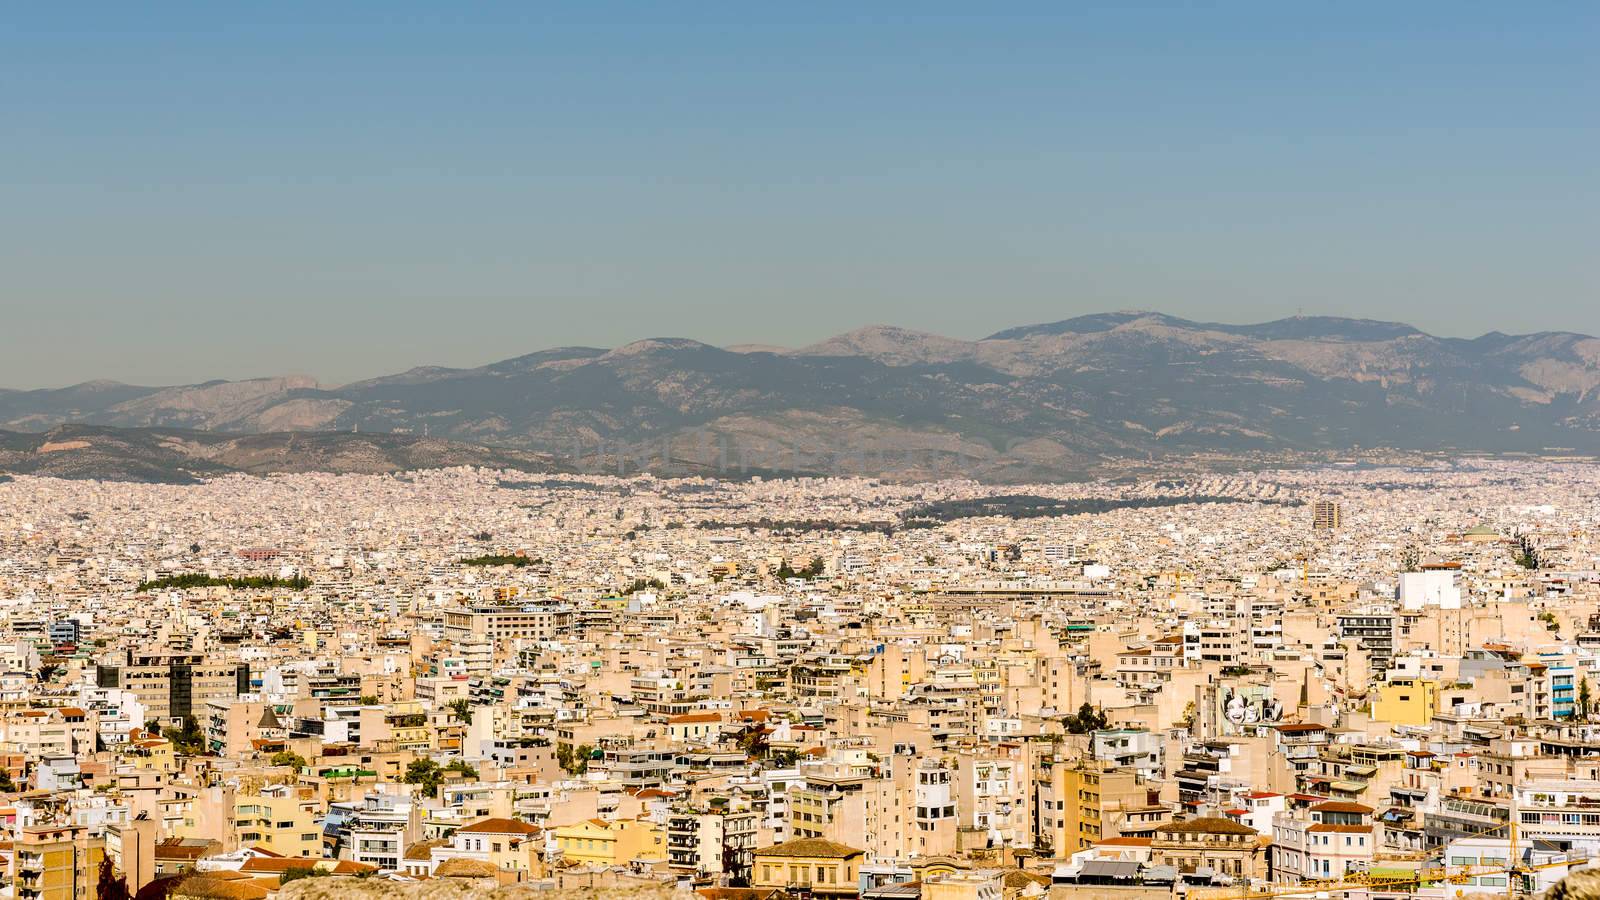 Panorama of Ahtens, Greece, out of the Acropolis hill.